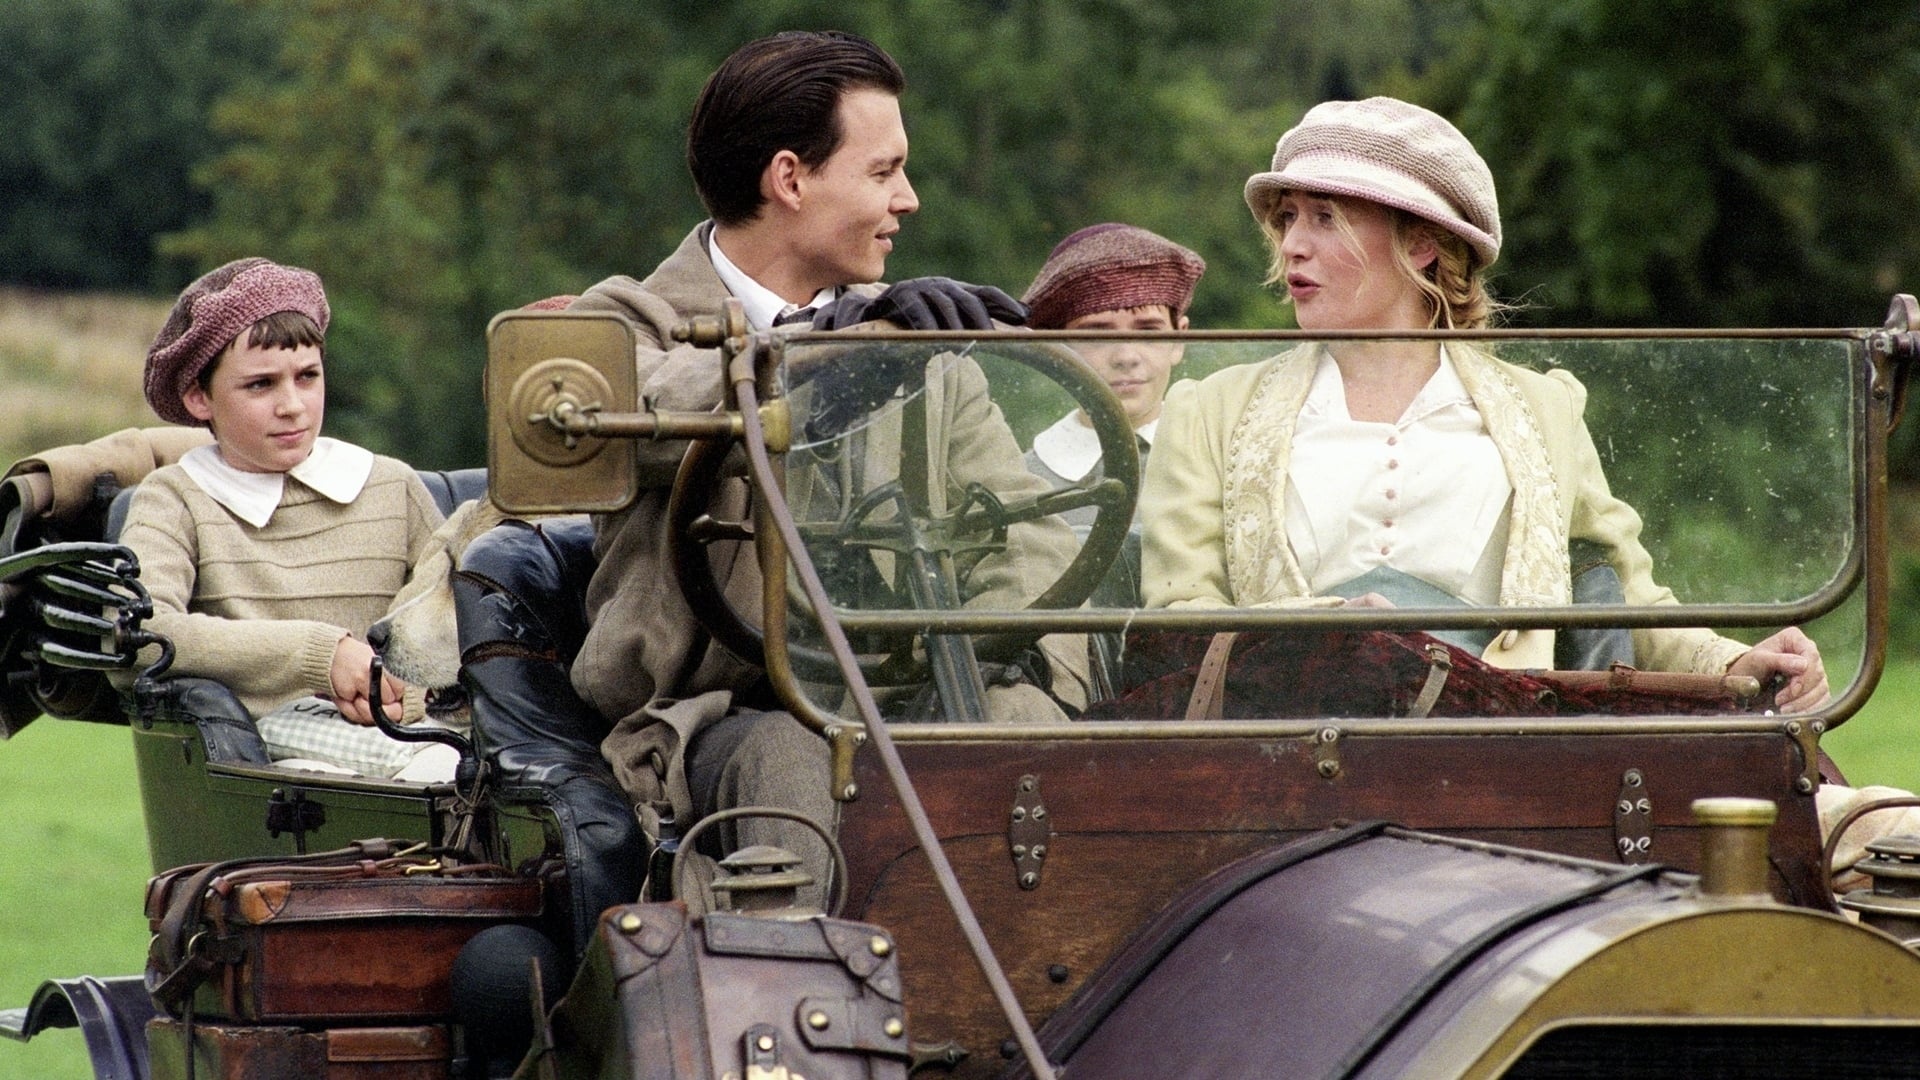 Finding Neverland: An American actor and musician, Johnny Depp as J. M. Barrie. 1920x1080 Full HD Wallpaper.